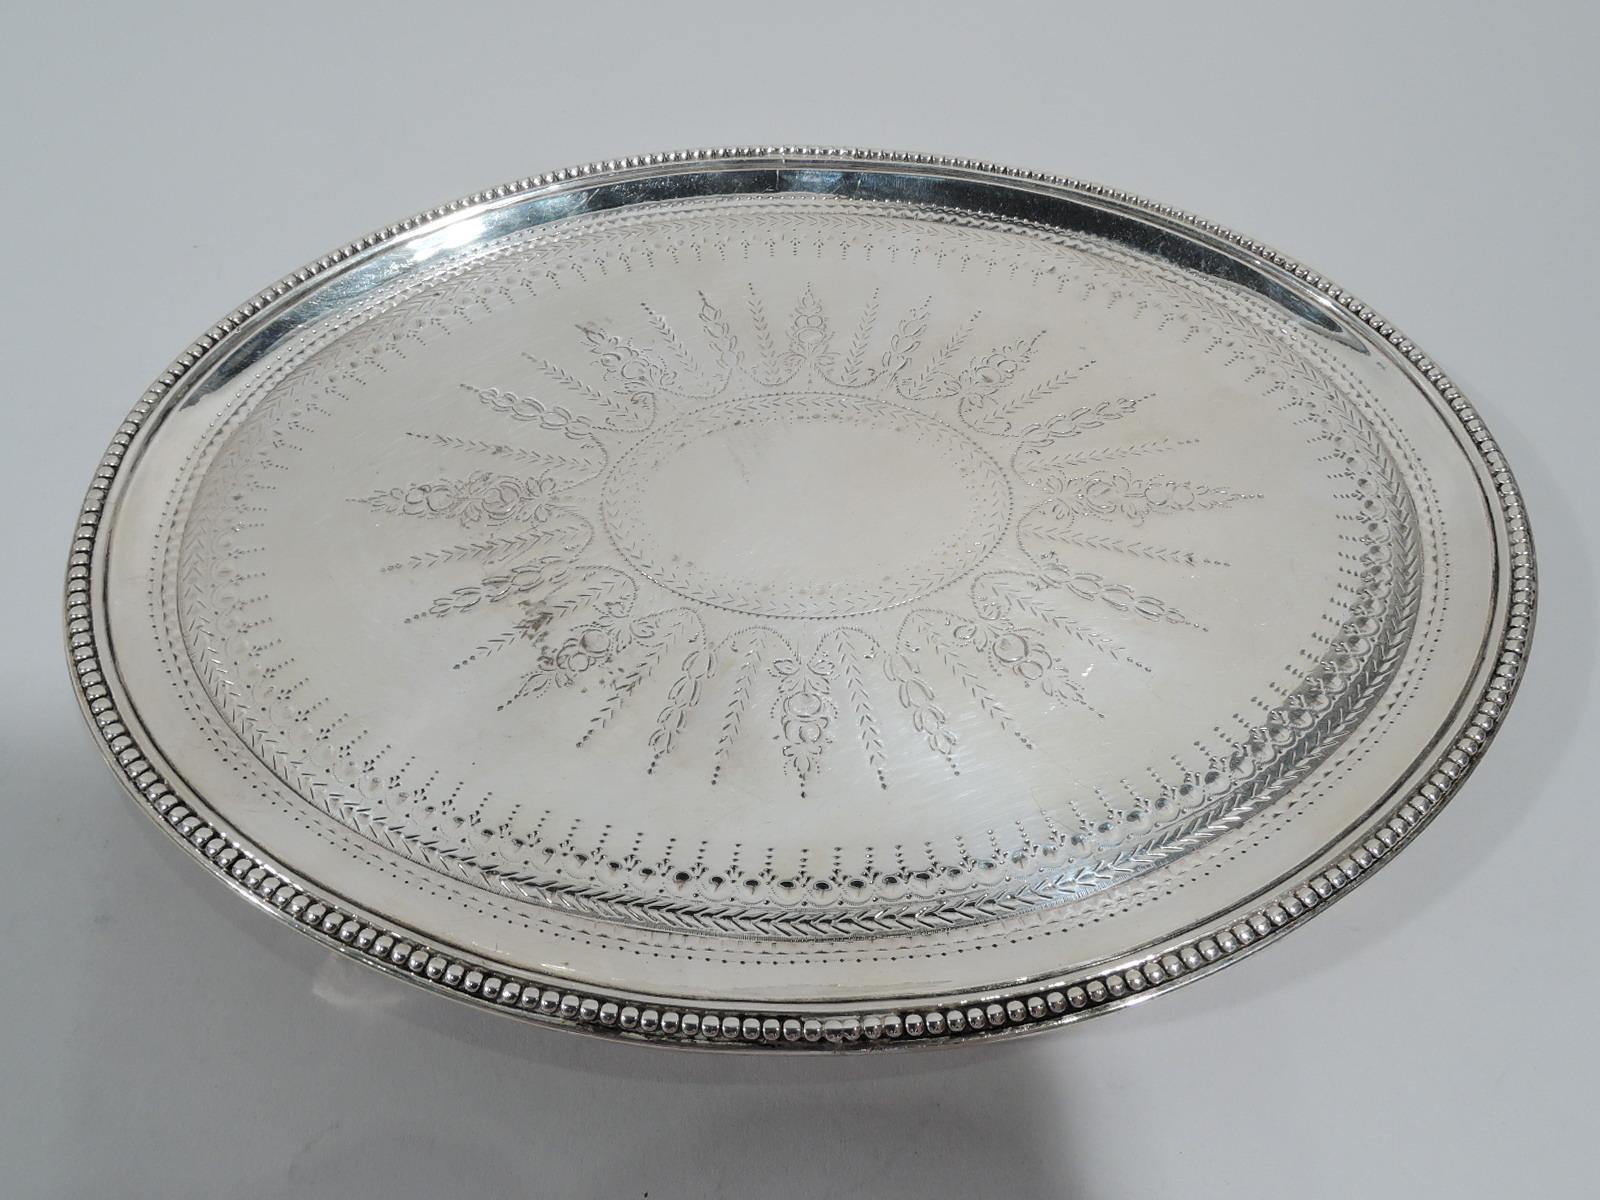 George III sterling silver salver. Made by Elizabeth Jones in London in 1784. Each: Oval with beaded rim and 4 beaded triangular supports. Neoclassical ornament including large central patera (vacant) engraved on well. Fully marked. Weight: 13 troy